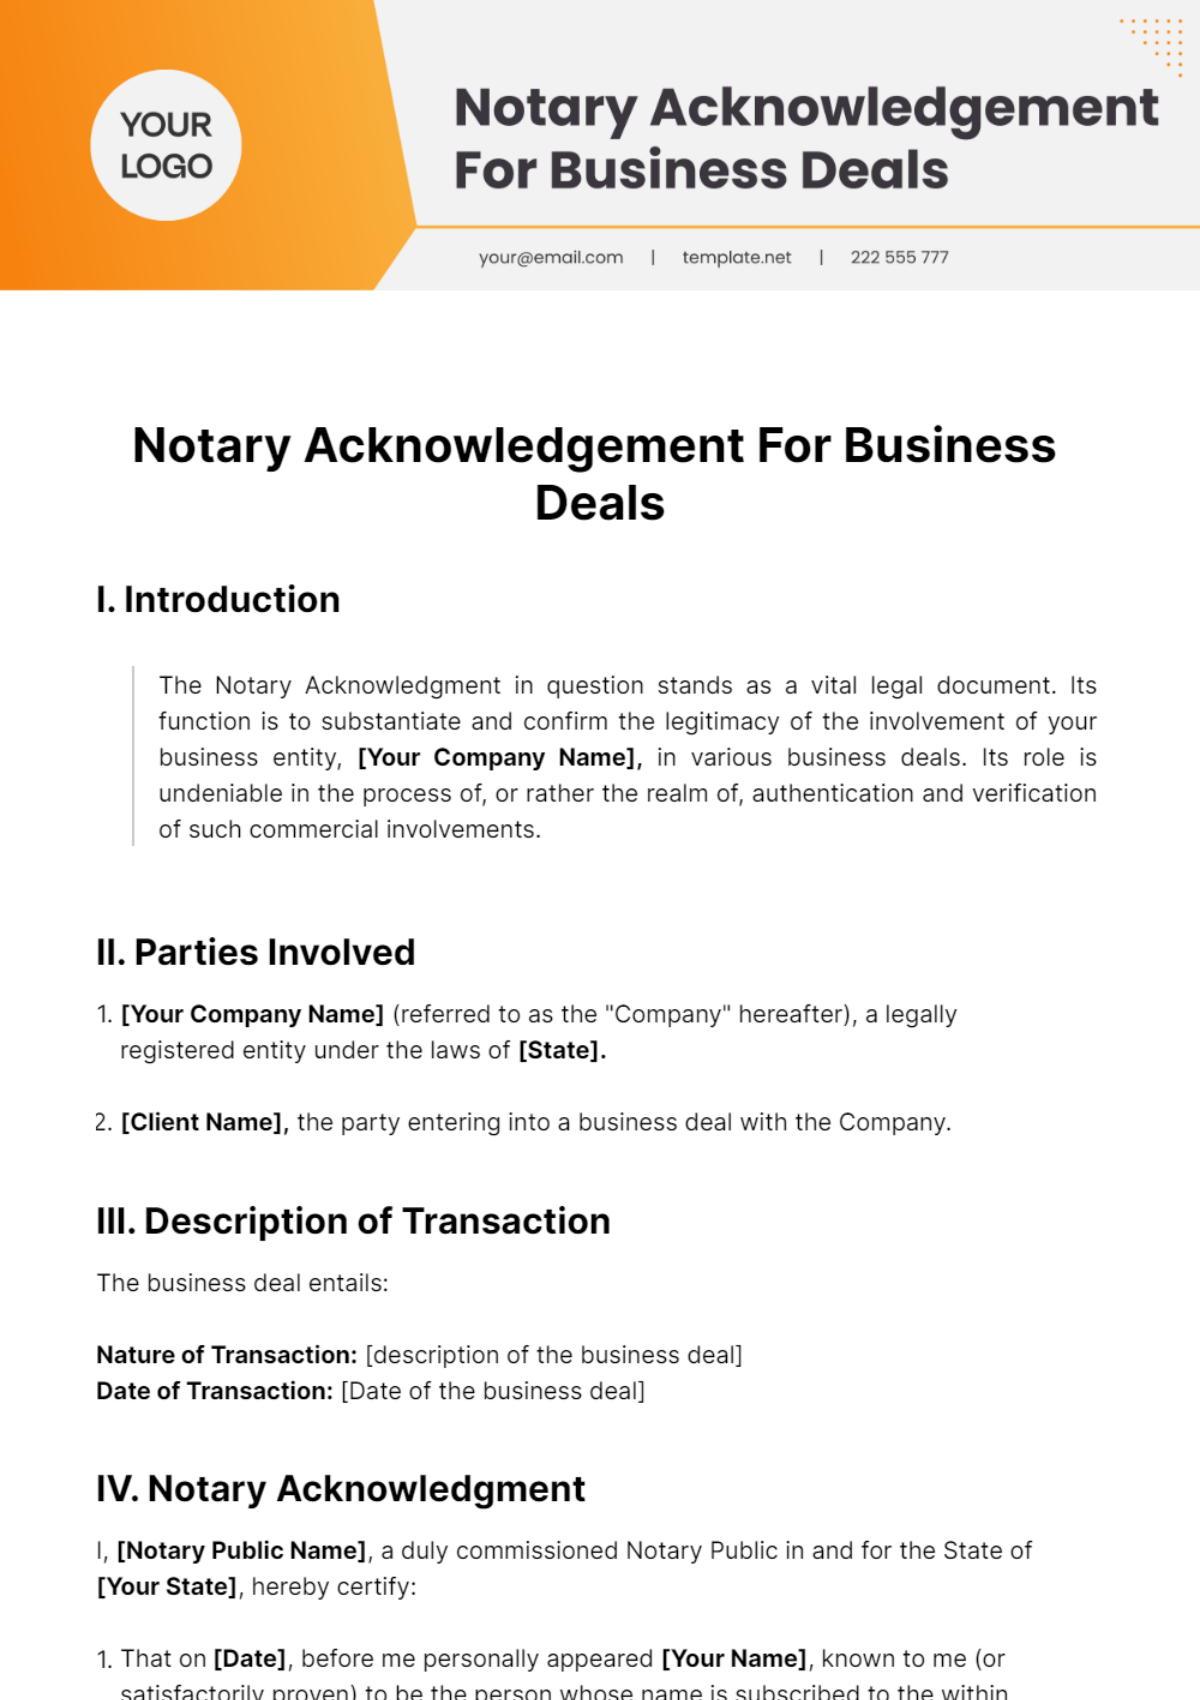 Free Notary Acknowledgment For Business Deals Template